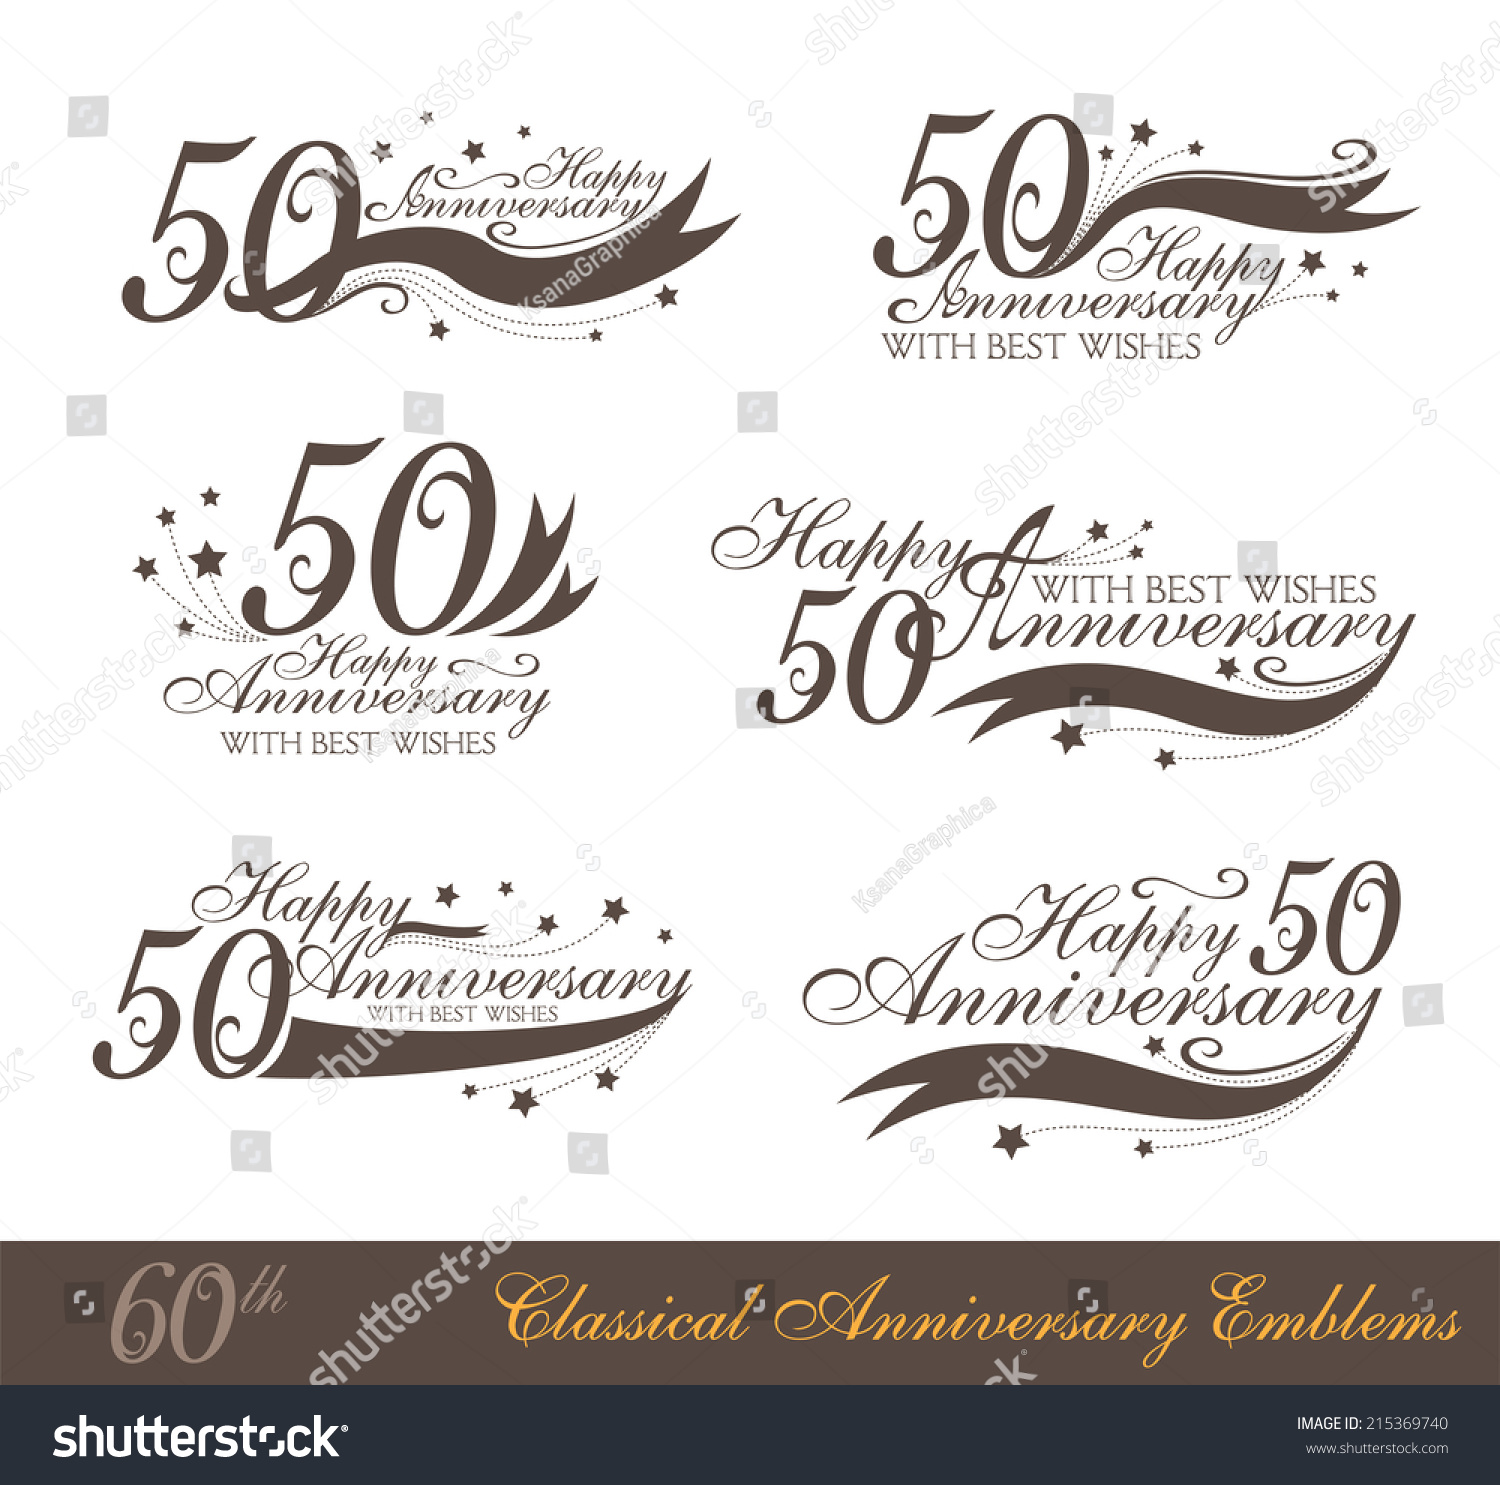 SVG of Anniversary 50th signs collection in classic style. Template of birthday celebration and jubilee emblems  with numbers and copy space on the ribbons. svg